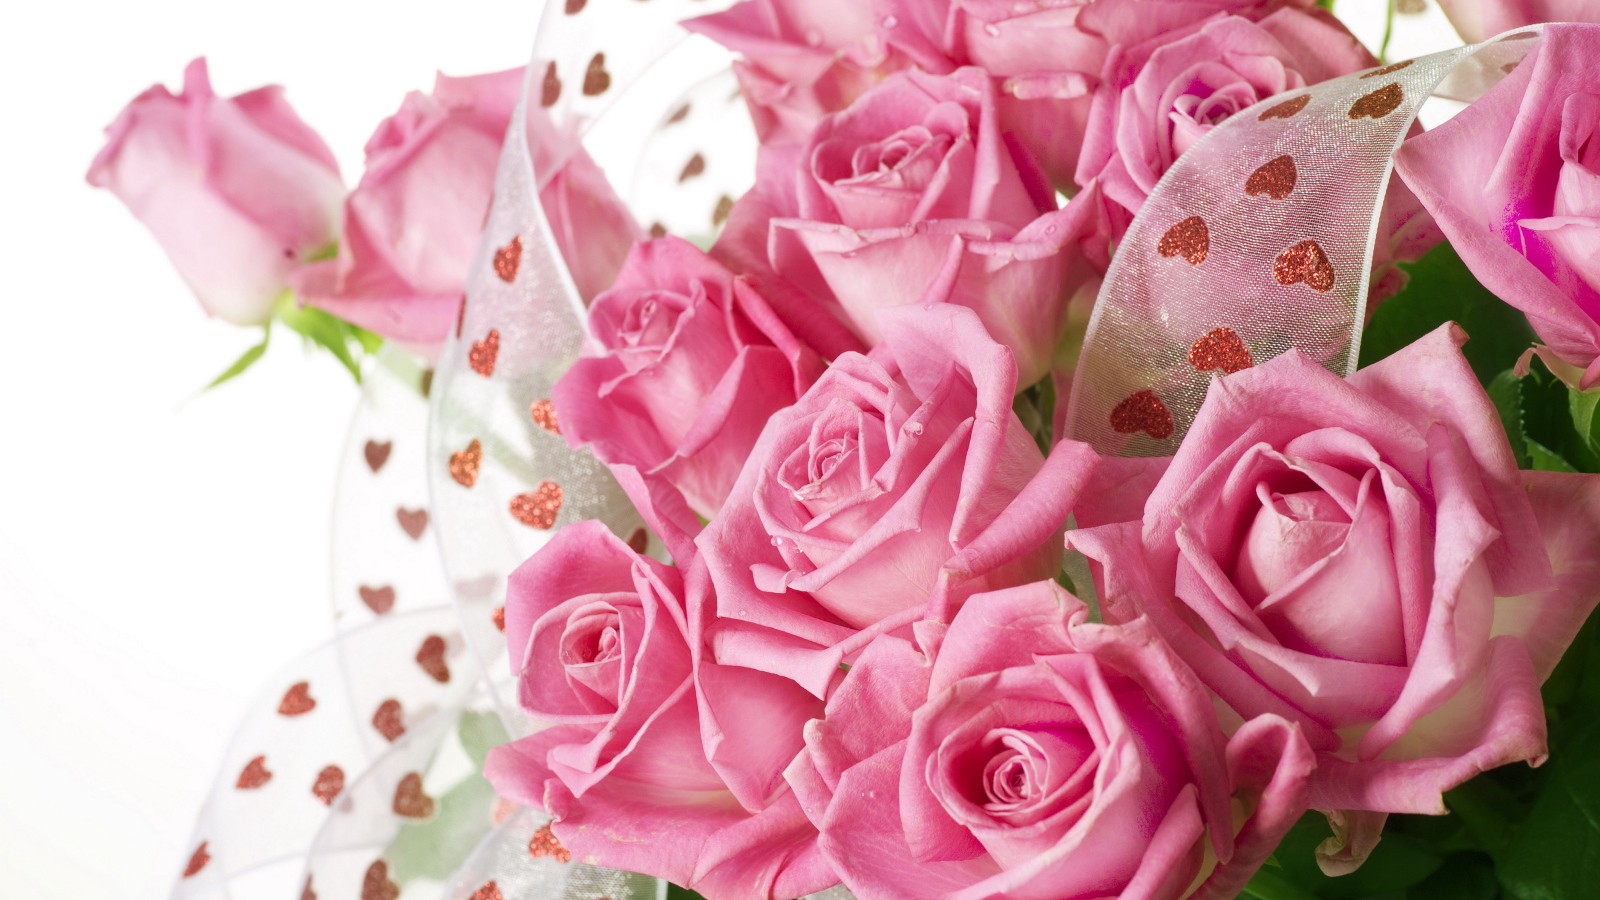 Big beautiful bouquet of pink roses with a satin ribbon on a white background